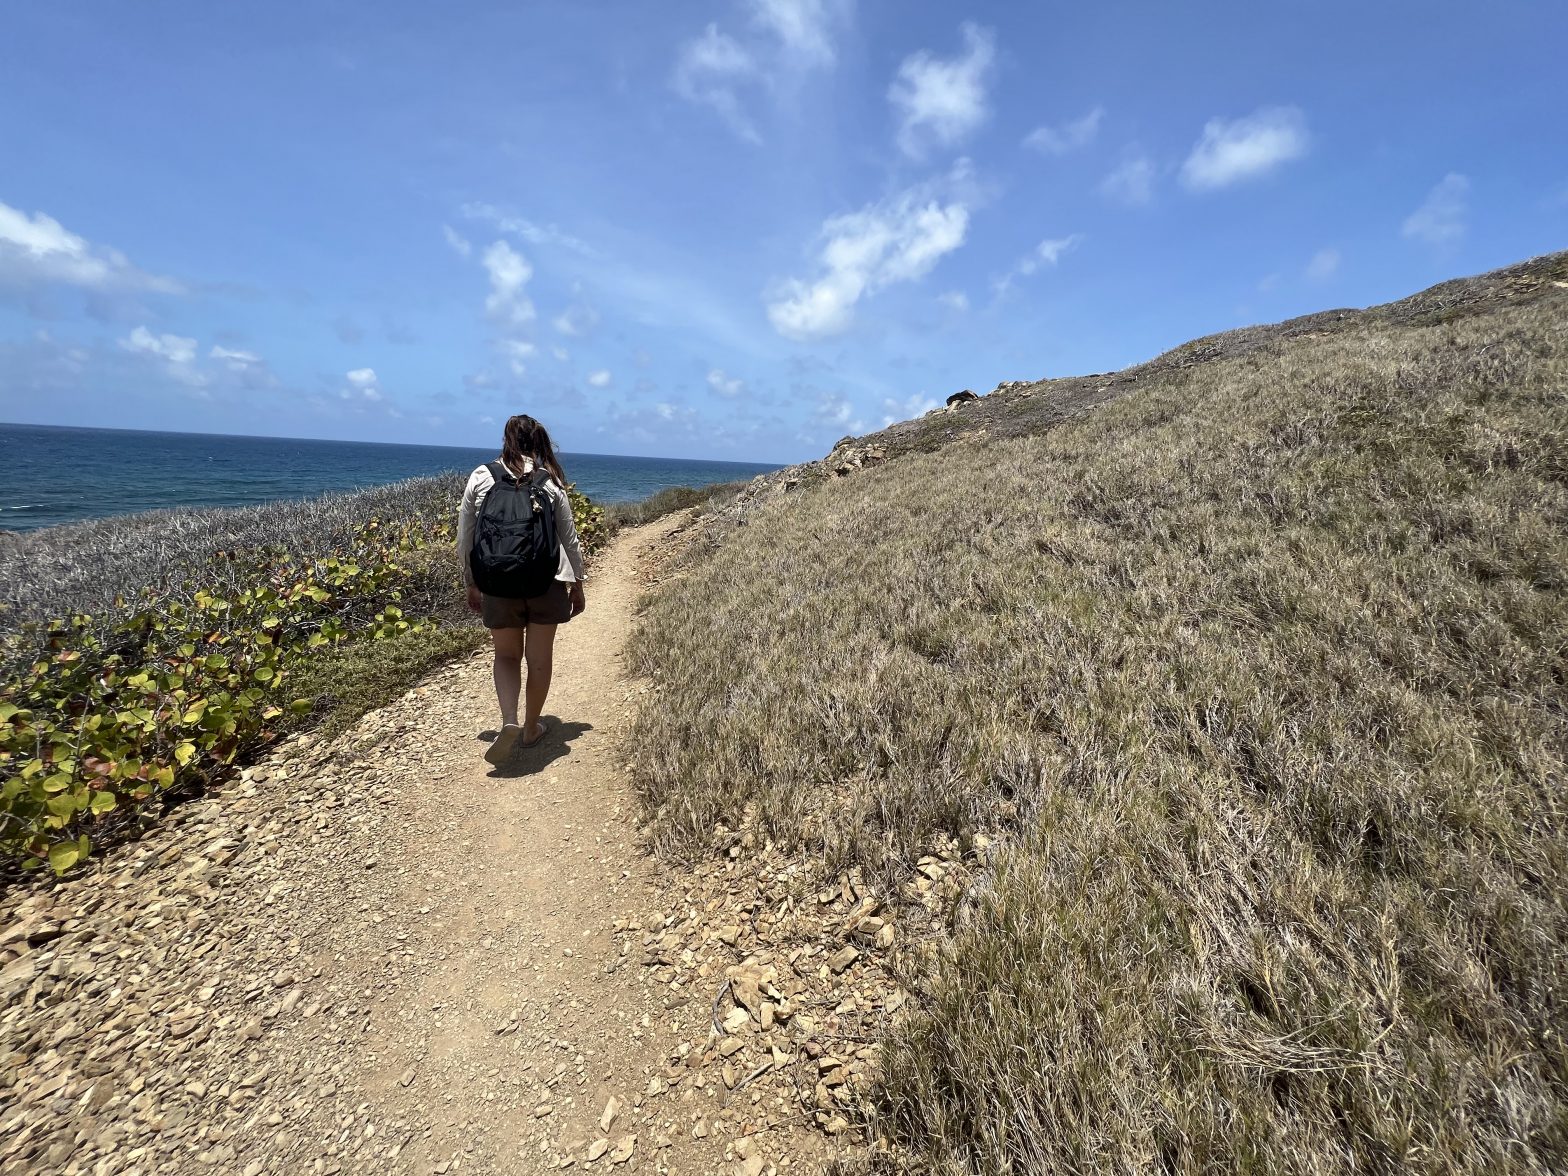 woman walking along sandy hiking trail with her back to the camera. Foliage is dry and scrub-like with the ocean in the background